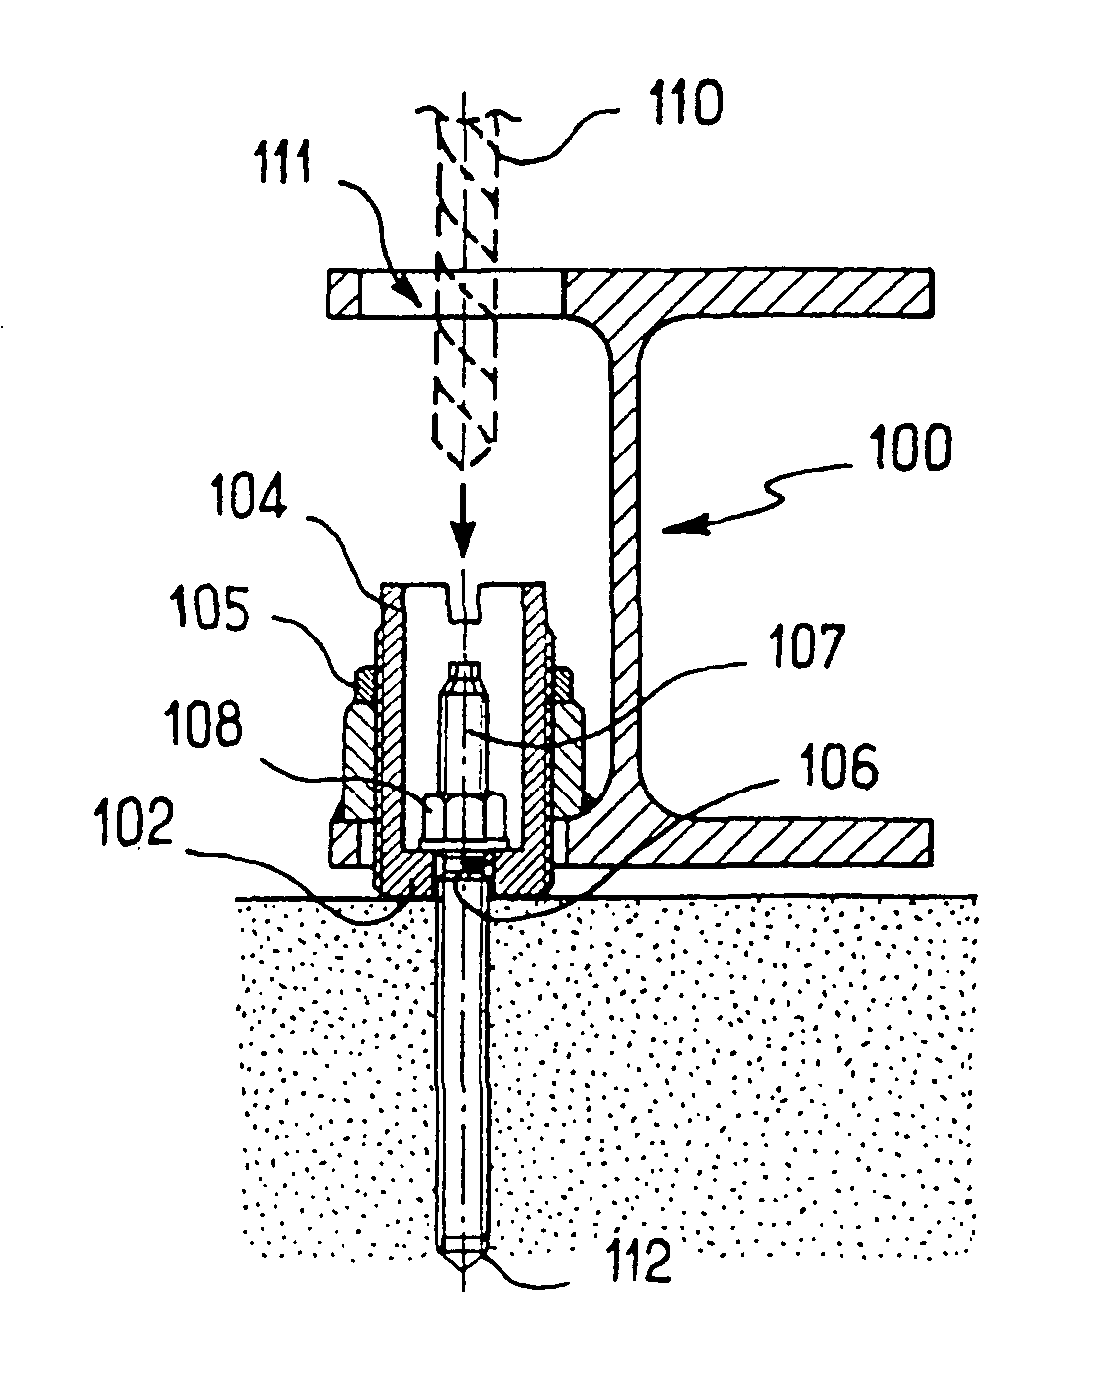 Method for position indexing of a machine or similar on the floor and machine leg used therefor